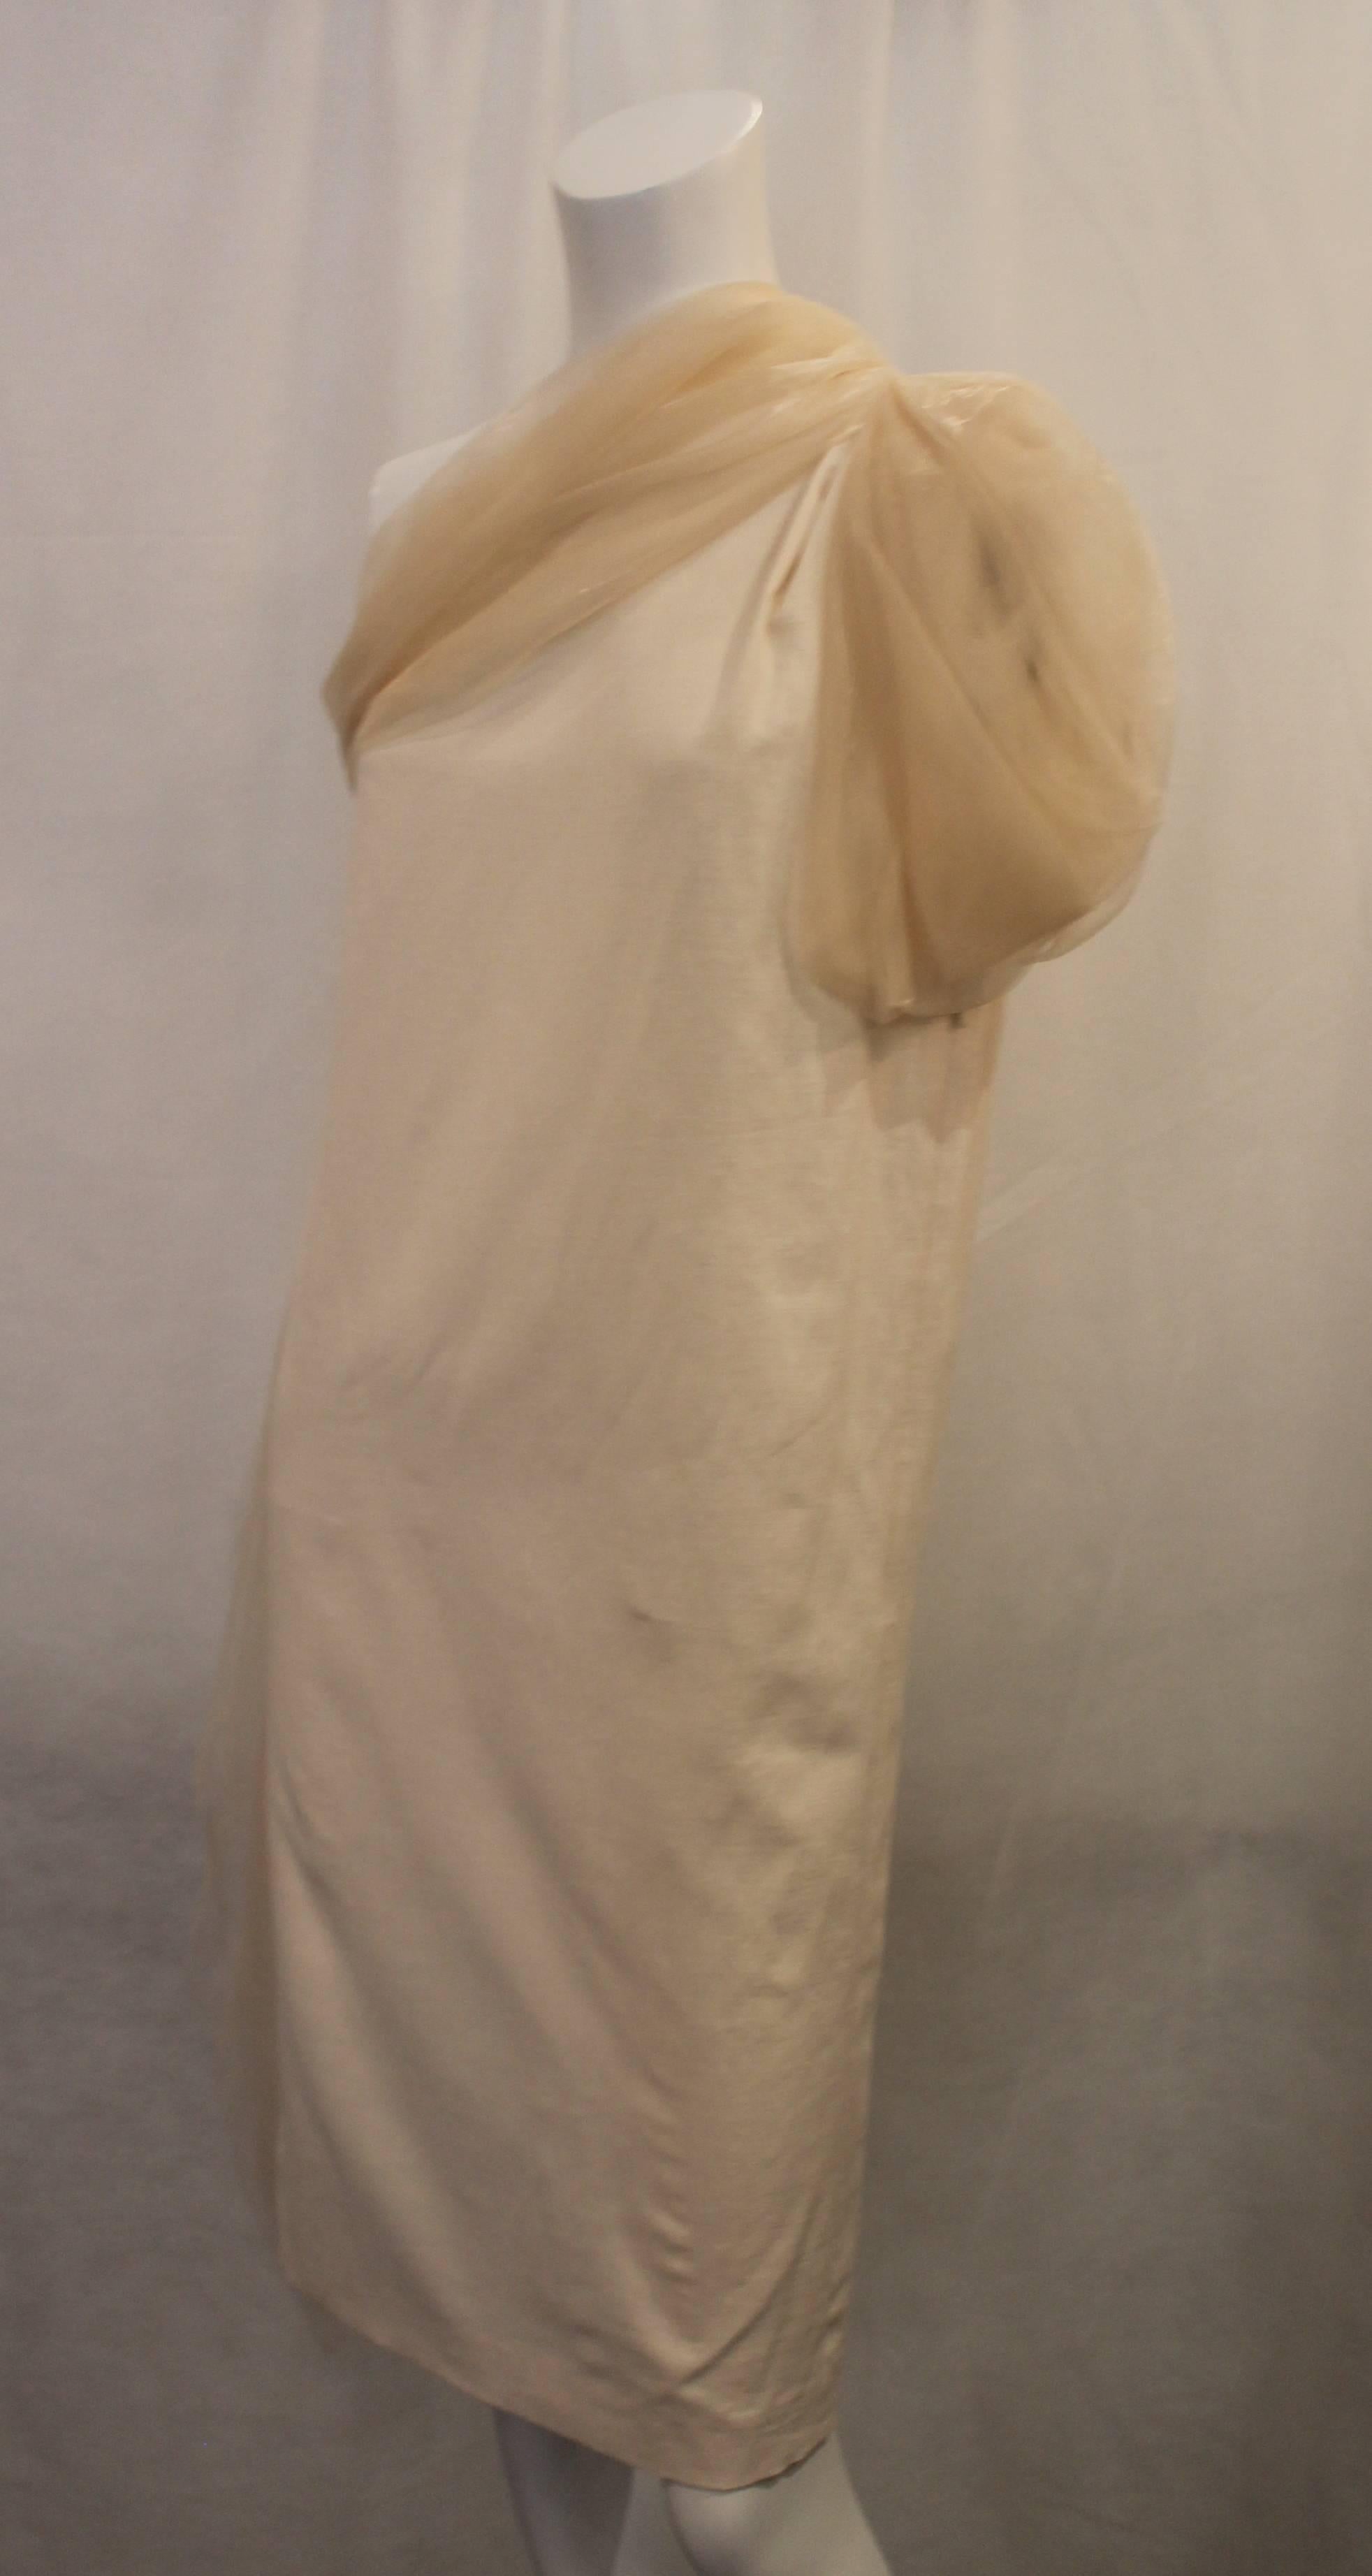 Bottega Veneta Cream Linen One Shoulder Dress with Silk Detail - 40. This elegant dress is an ivory color with a sheer cream-colored shoulder strap and sash. This dress is in excellent condition and is an elegant, unique dress for summer.